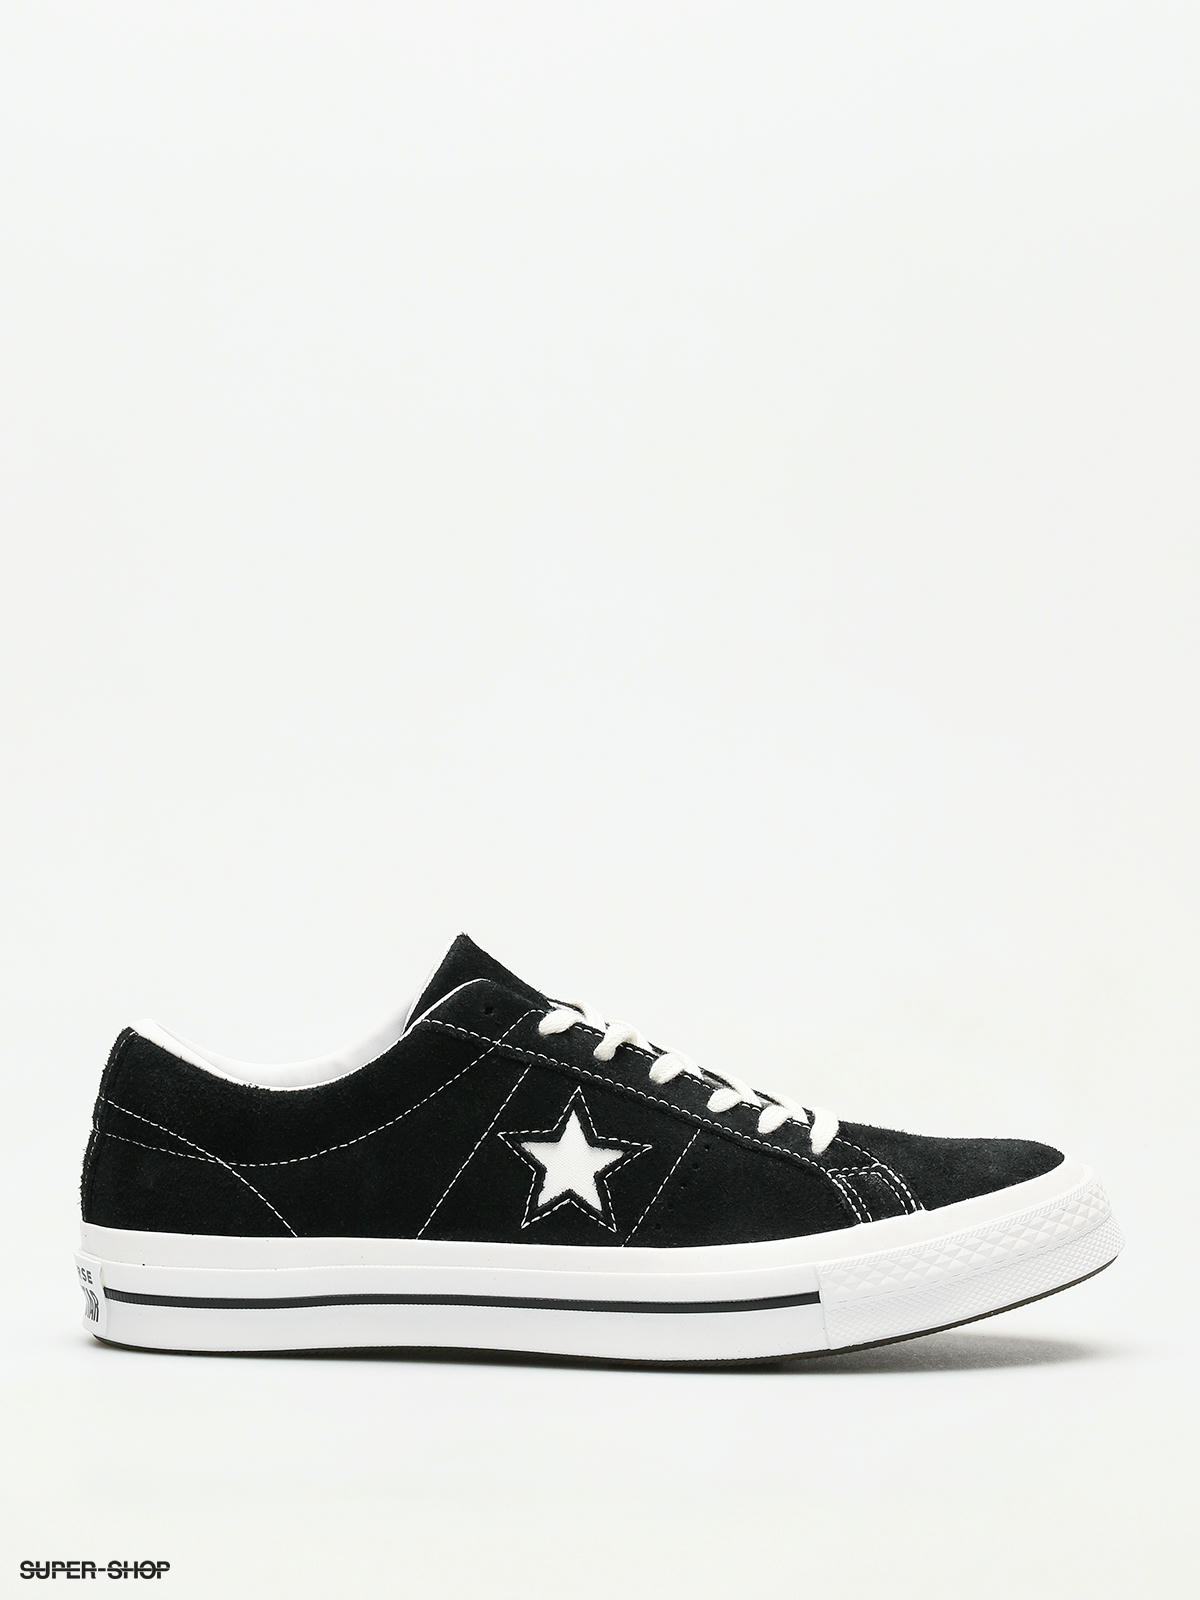 Converse Shoes One Star 74 Ox (black/white/white)